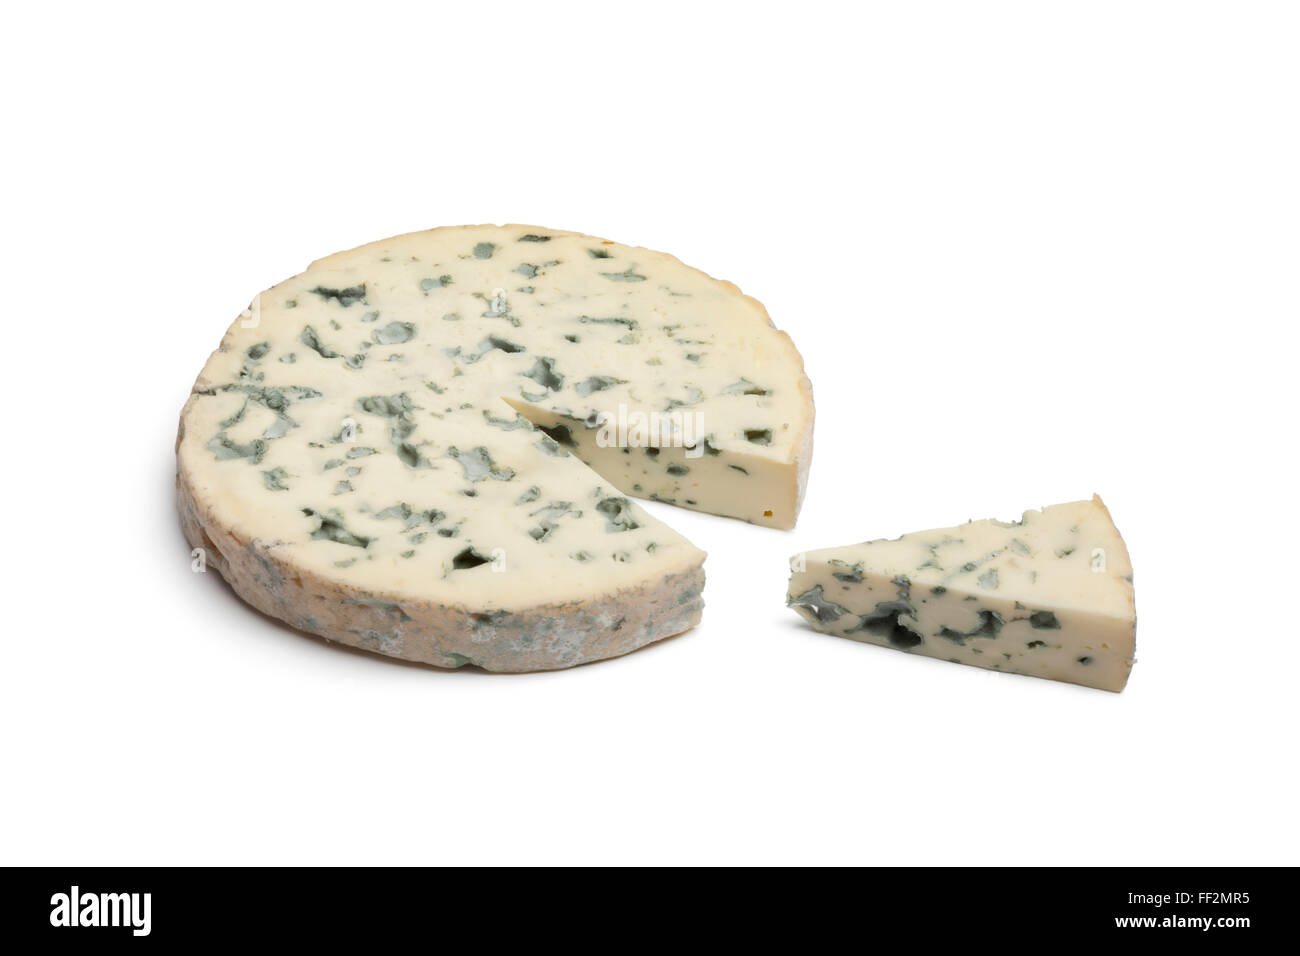 Slice of Fourme d'Ambert cheese on white background Stock Photo